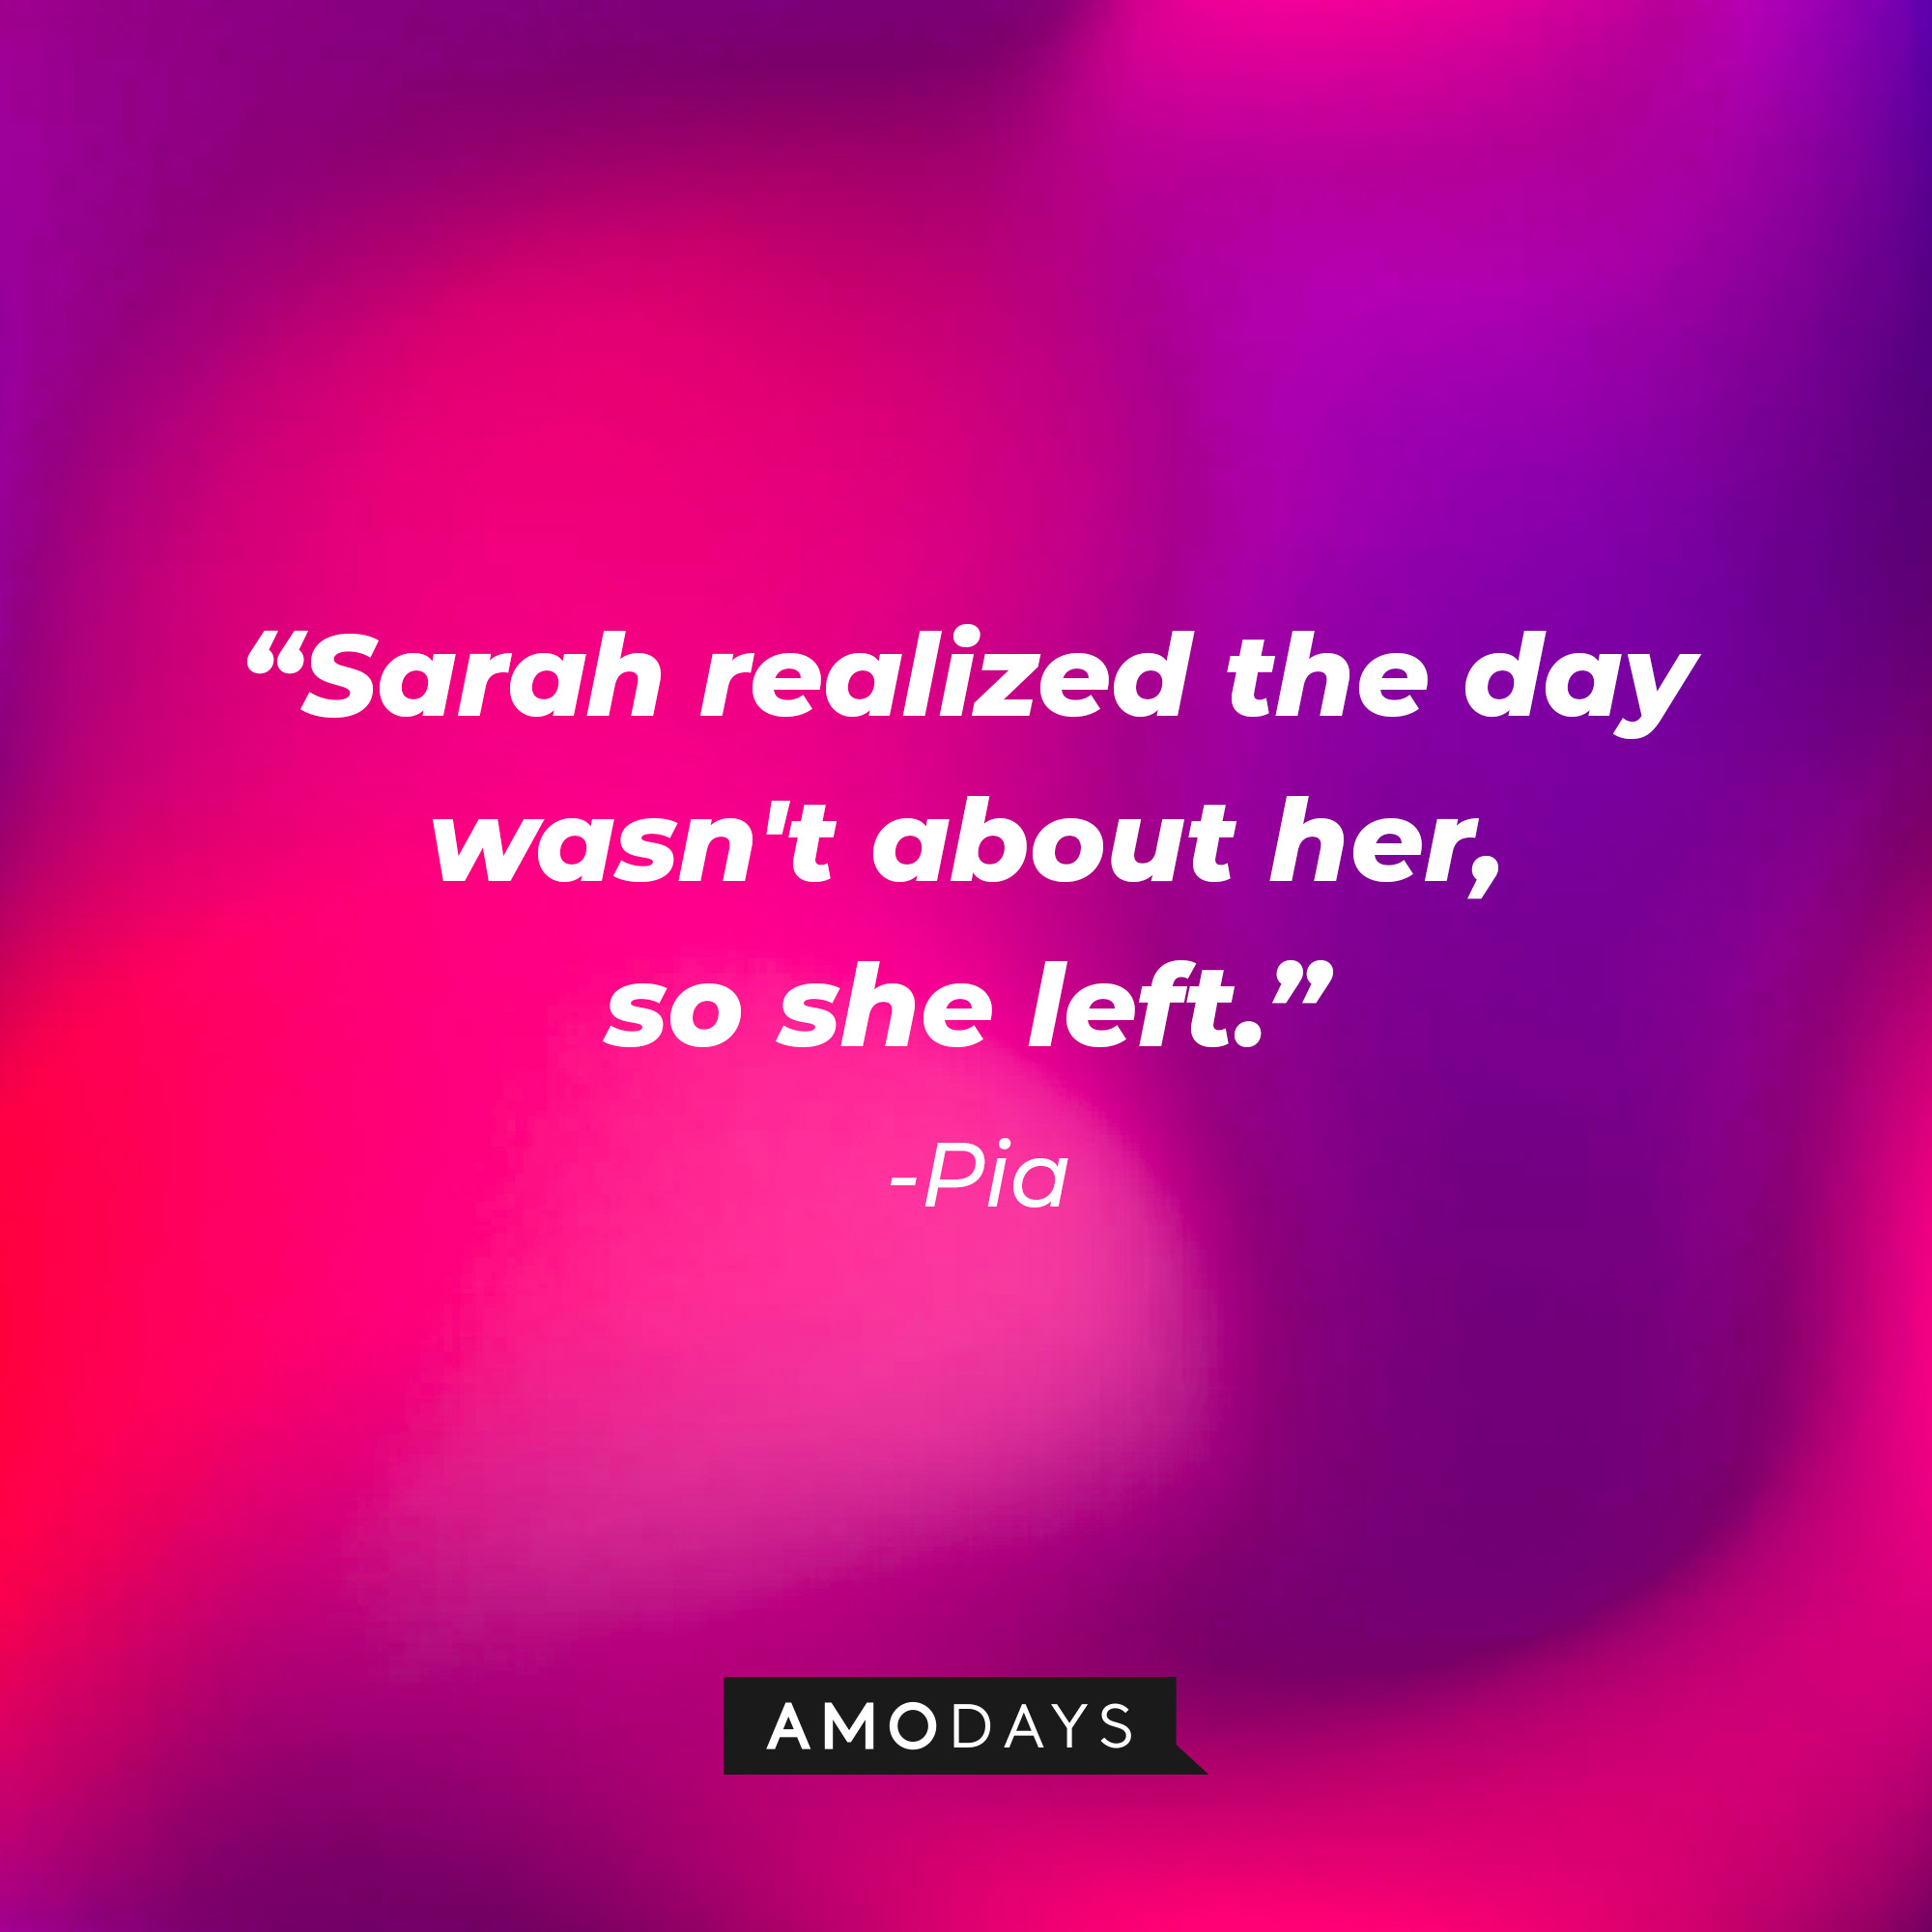 Pia’s quote: “Sarah realized the day wasn't about her, so she left.” │Source: AmoDays